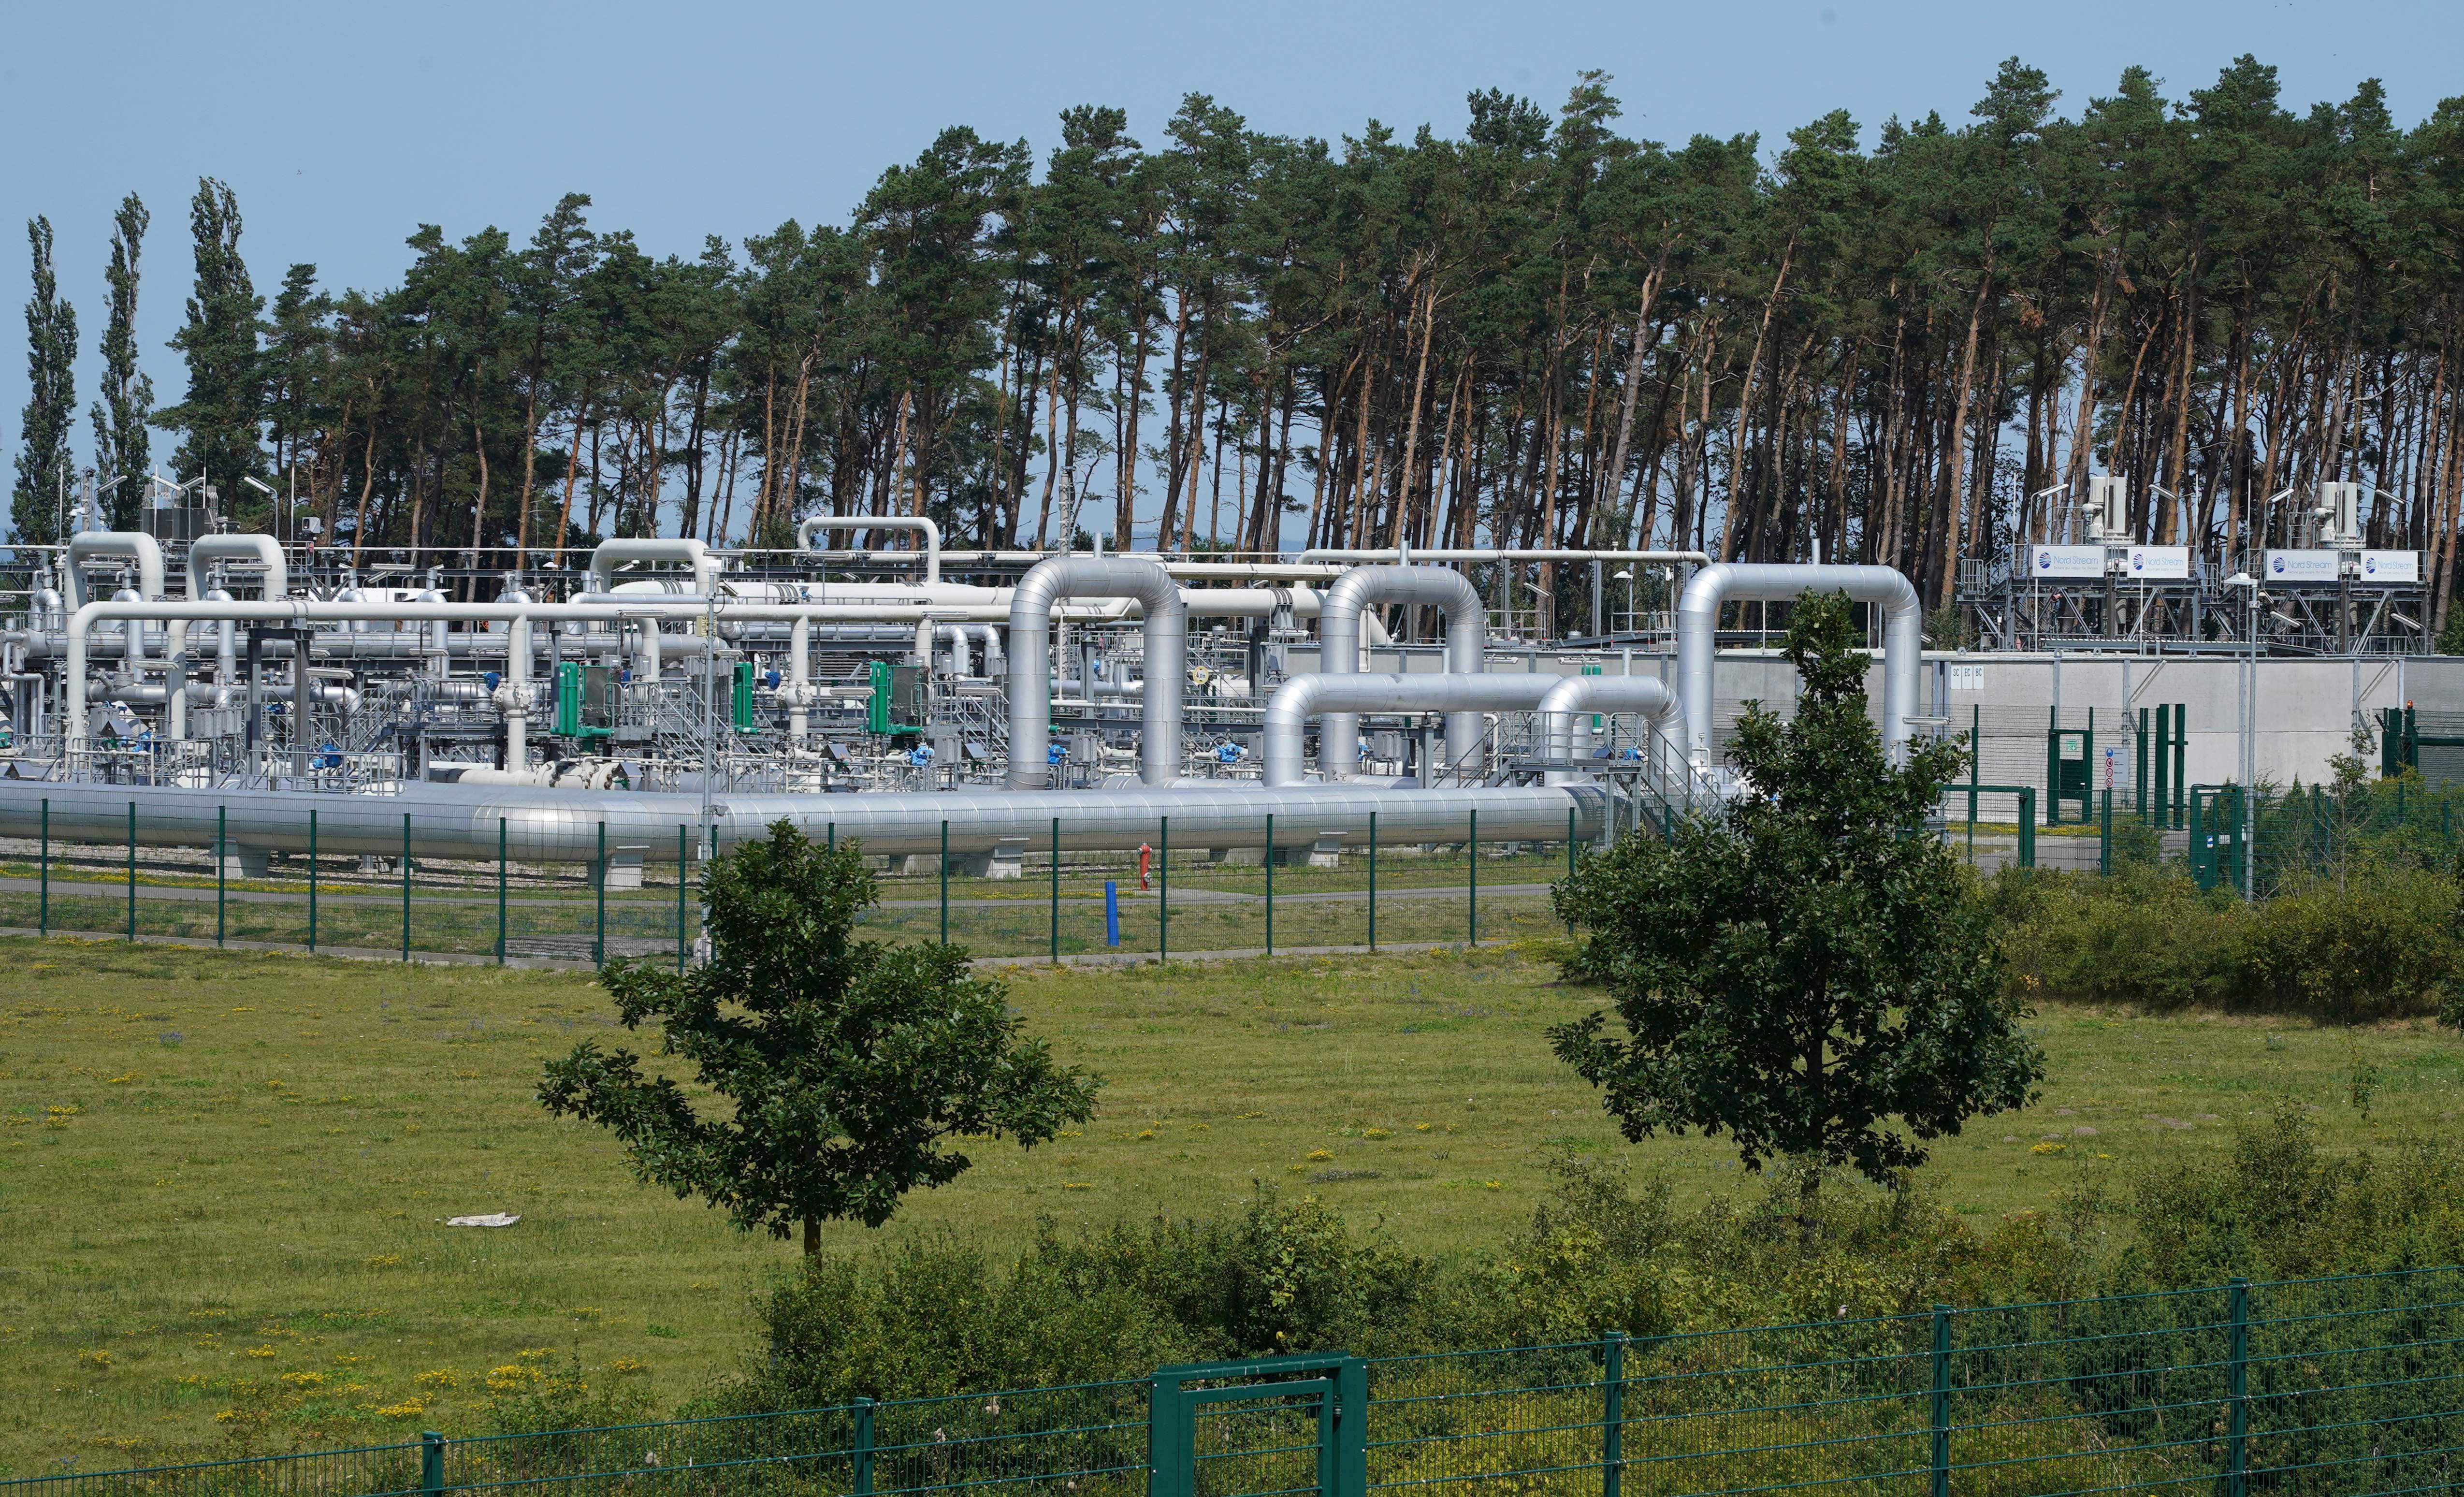 Russia Halts Gas Flows to Europe via Key Route, Germany Sees ‘No Cause for Alarm’ Yet